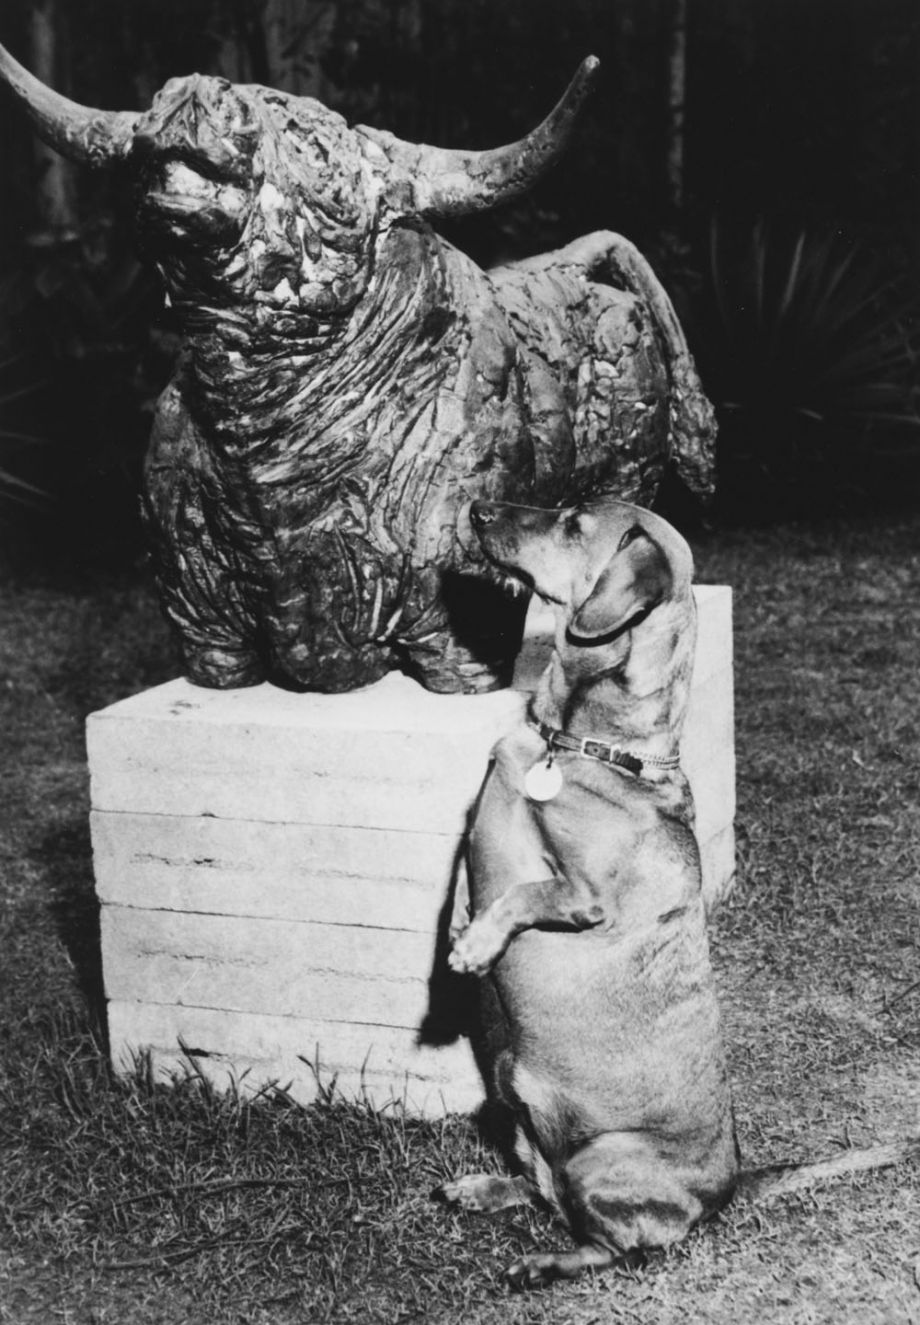 Lindy the Johnstone’s dachshund with Bull by Kathleen Shillam in the garden of The Johnstone Gallery at Cintra Road, 1965